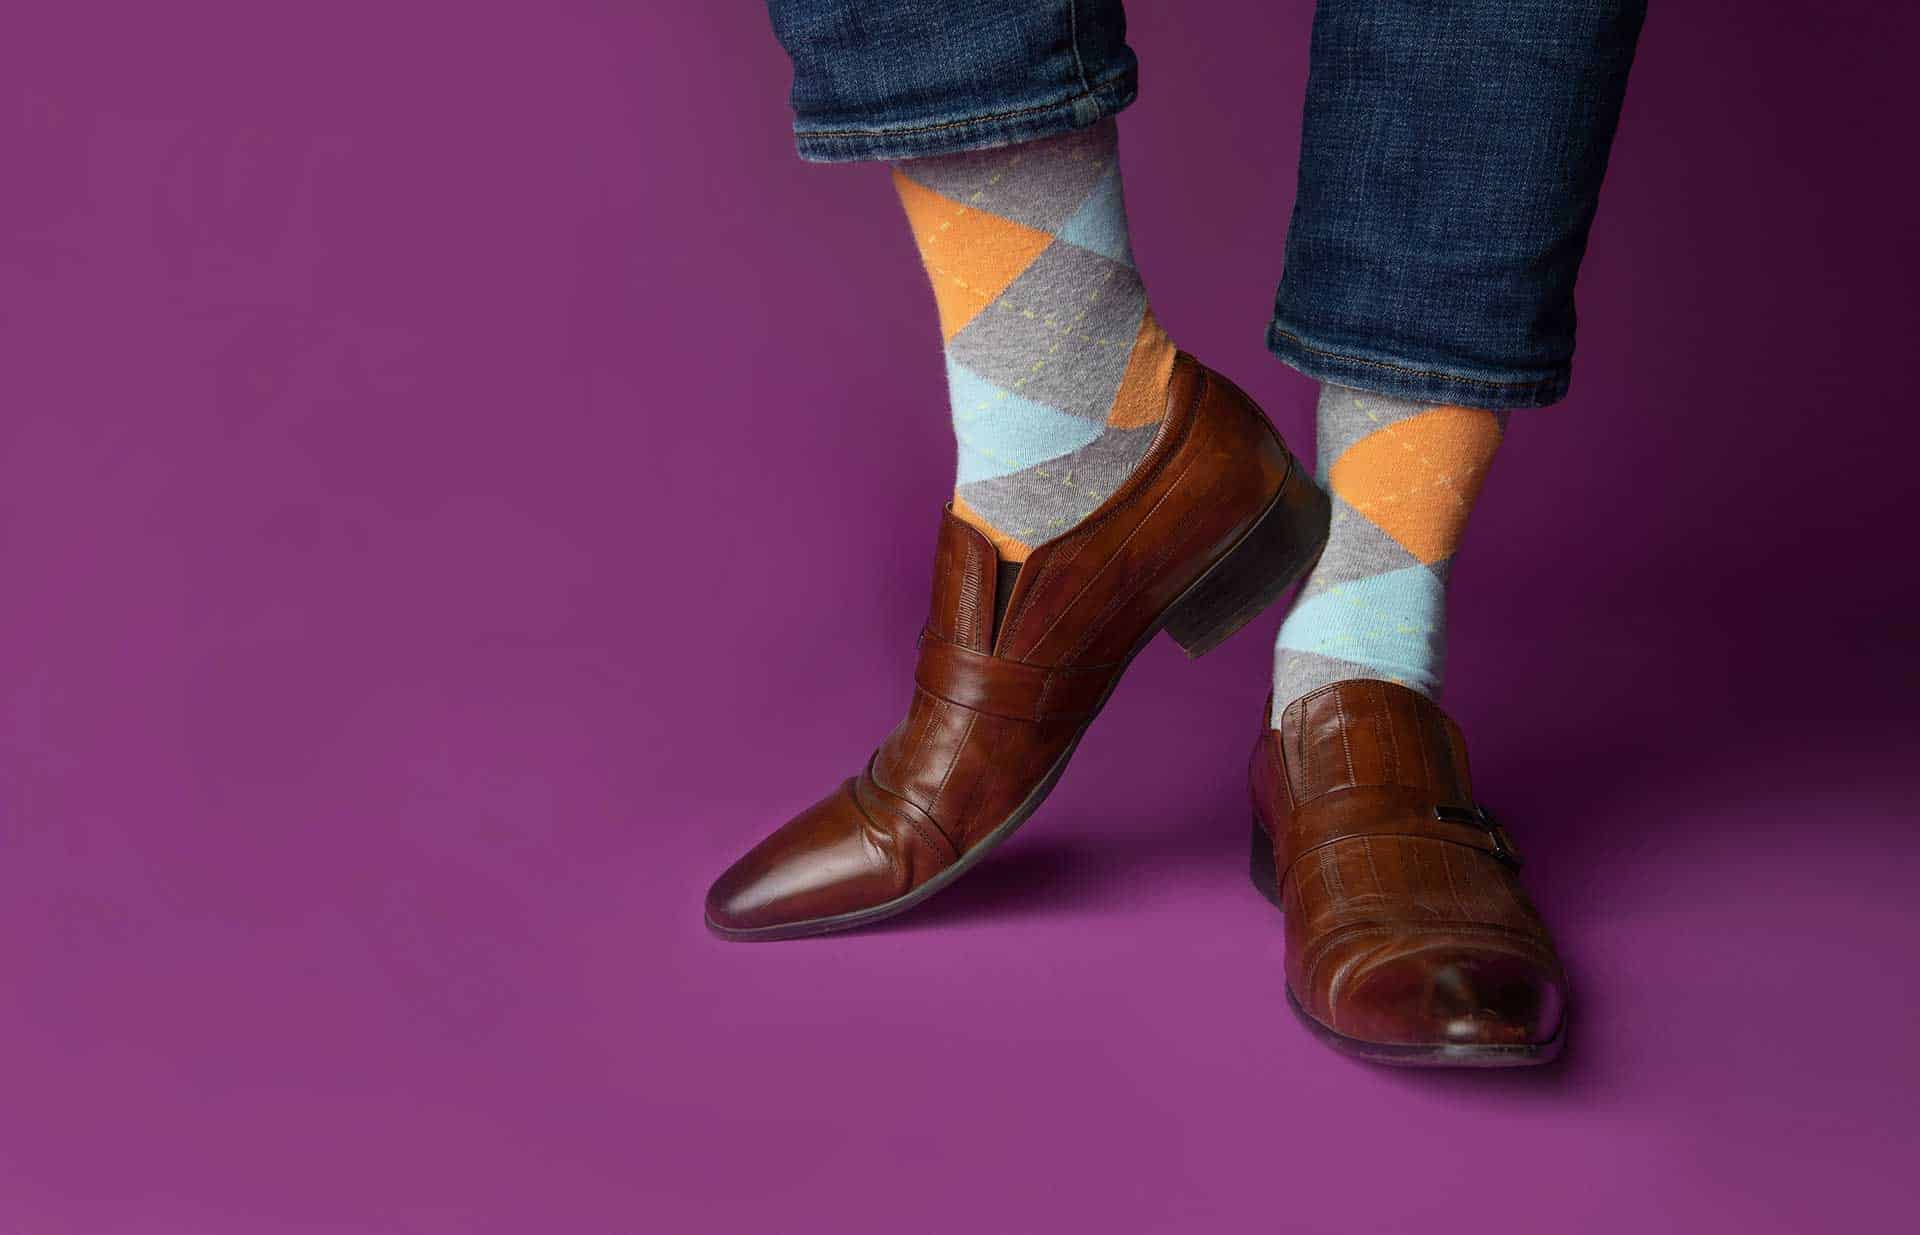 The Complete Guide to Wearing Men’s Socks